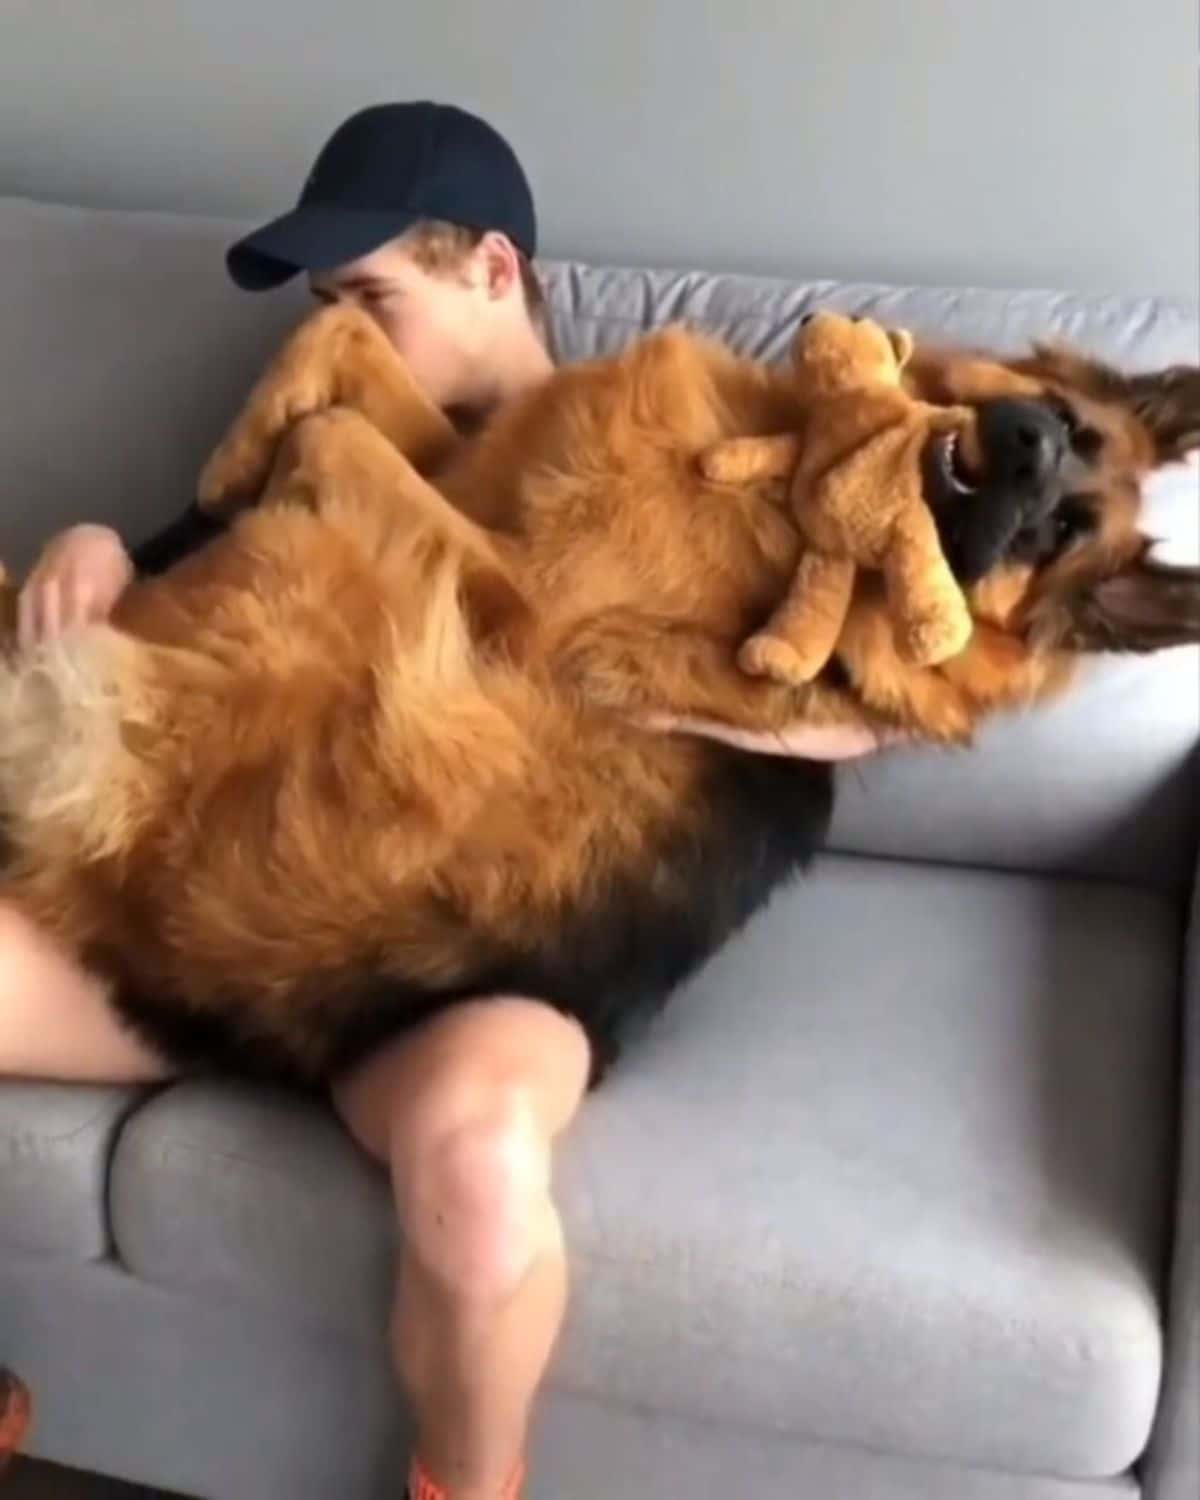 large fluffy brown dog sitting on a man's lap holding a brown teddy bear in the mouth